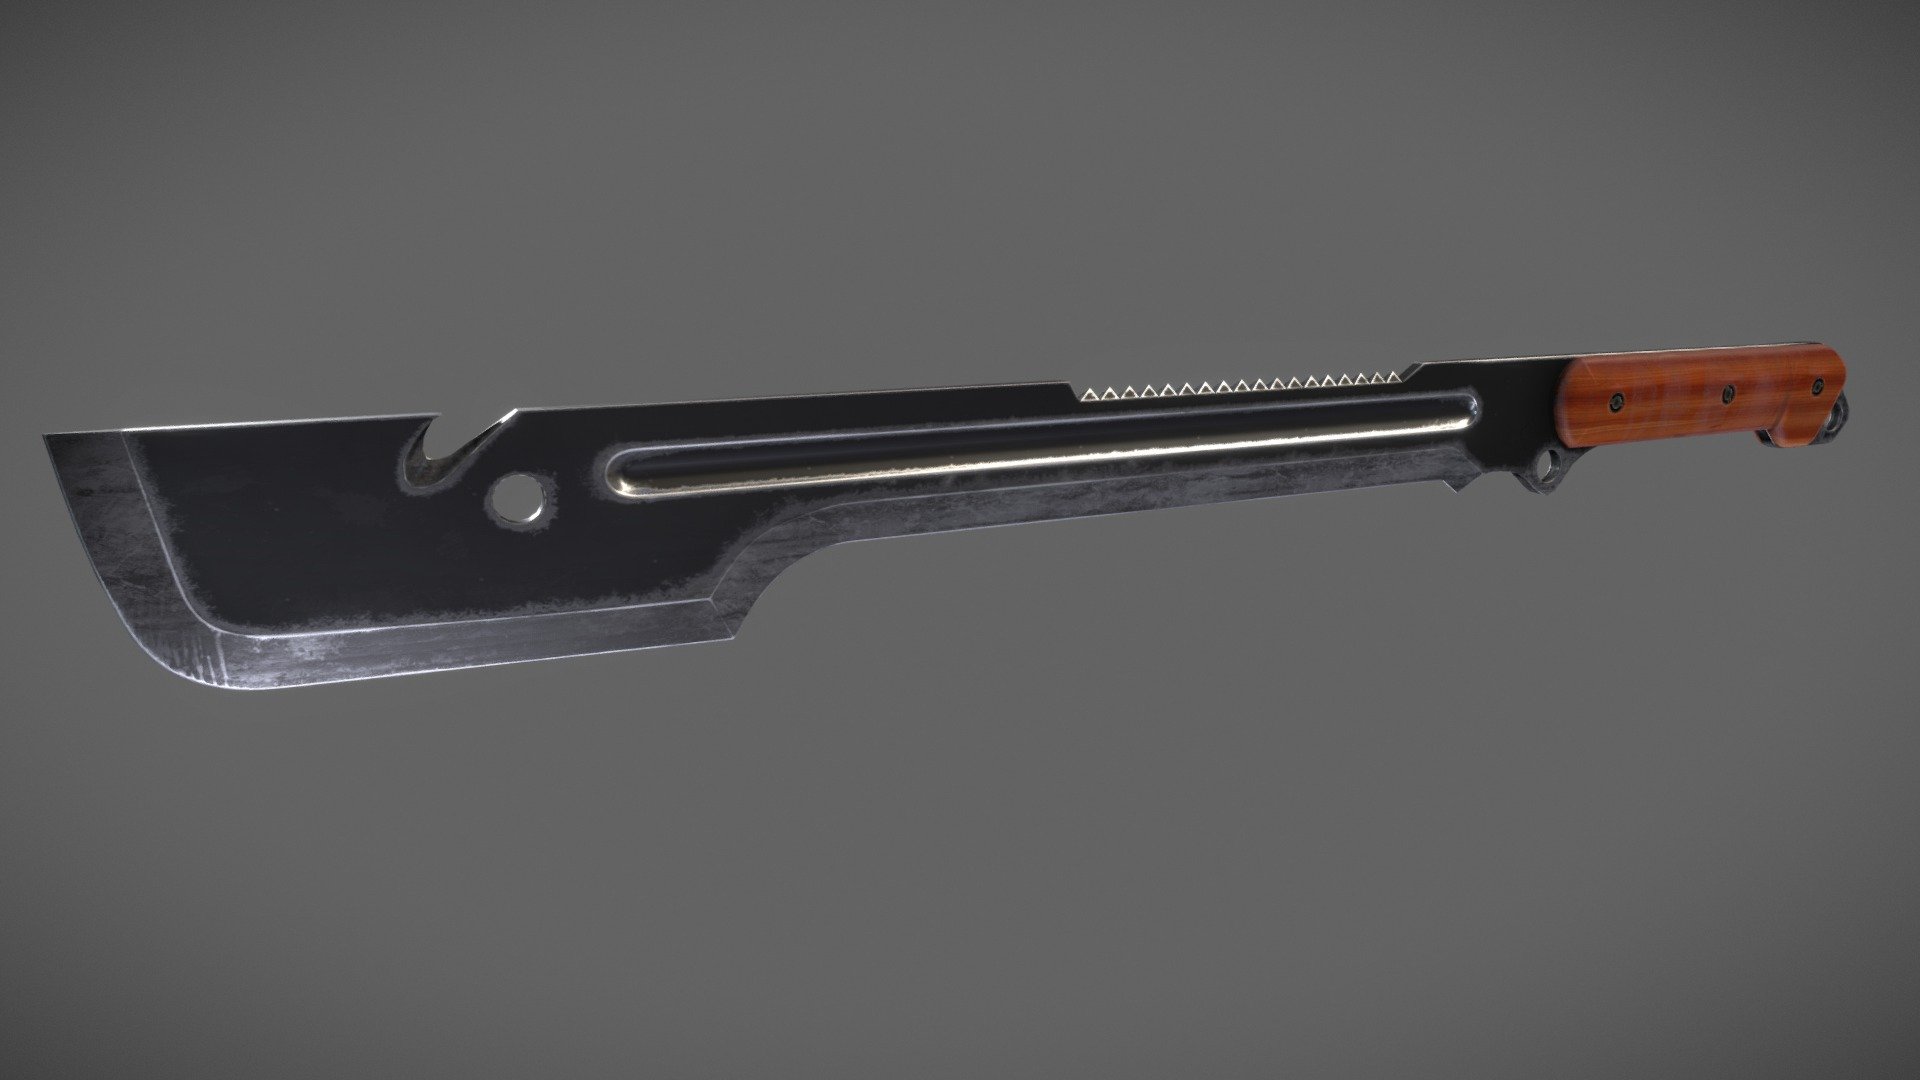 Just a big, dirty blade.
Made in 3DS Max and textured in Substance Painter 2 3d model